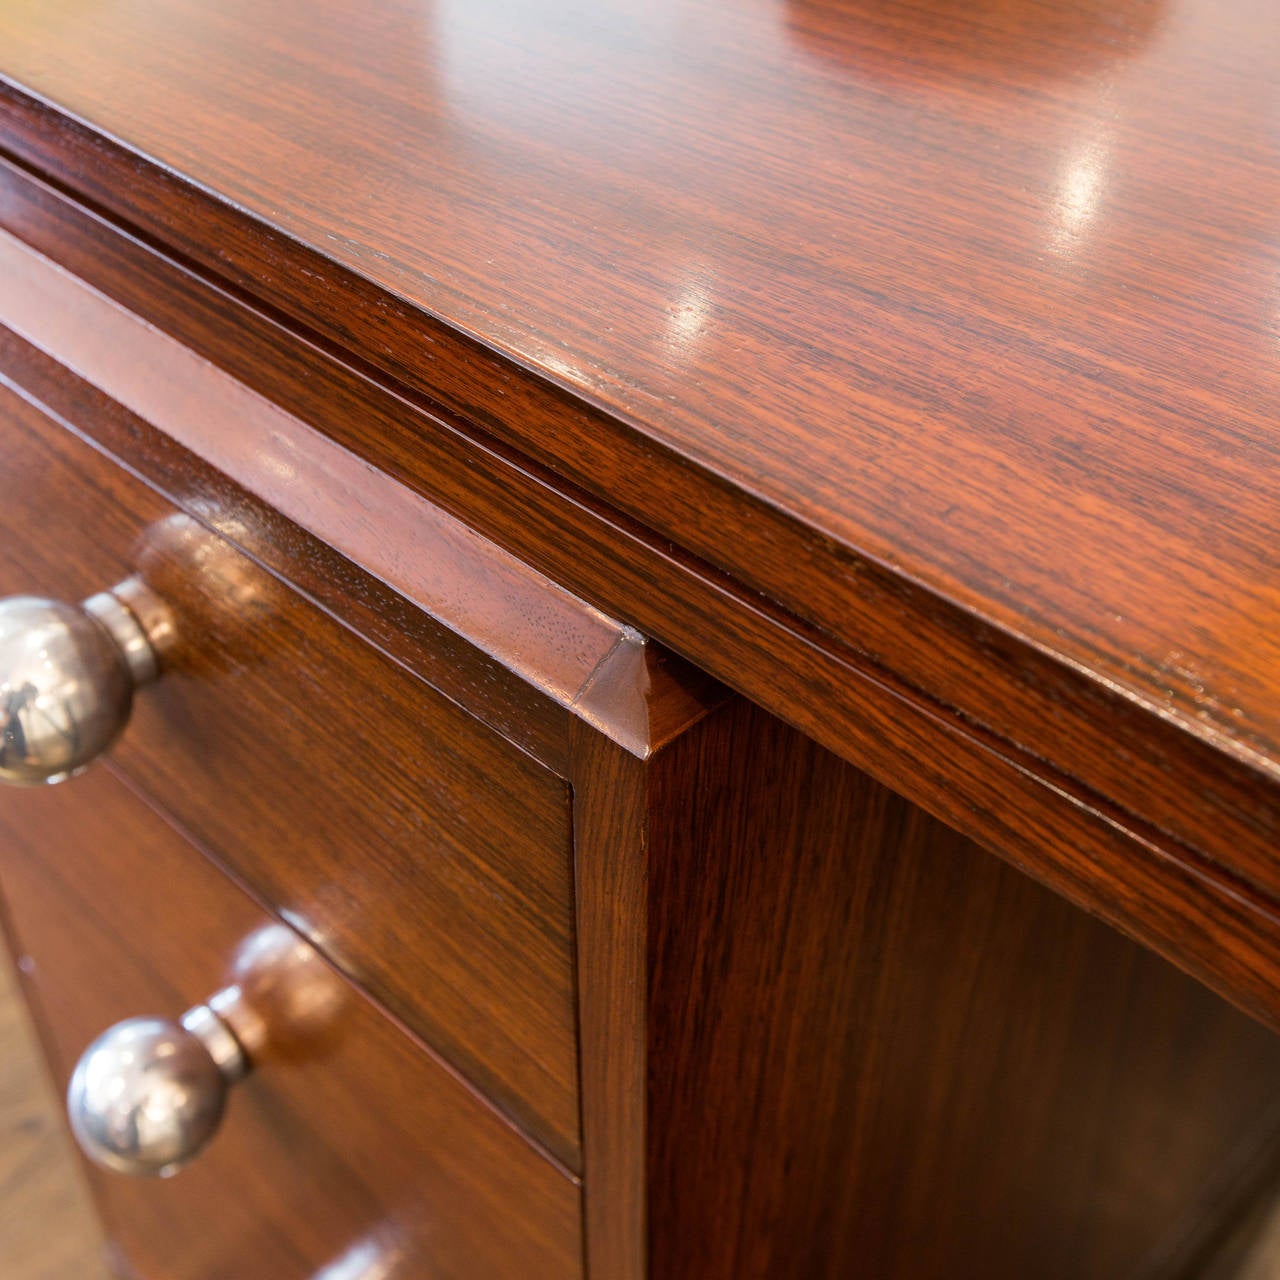 Freshly restored 6-drawer double pedestal deco desk with super cool polished aluminum drawer pulls and great rosewood veneers.